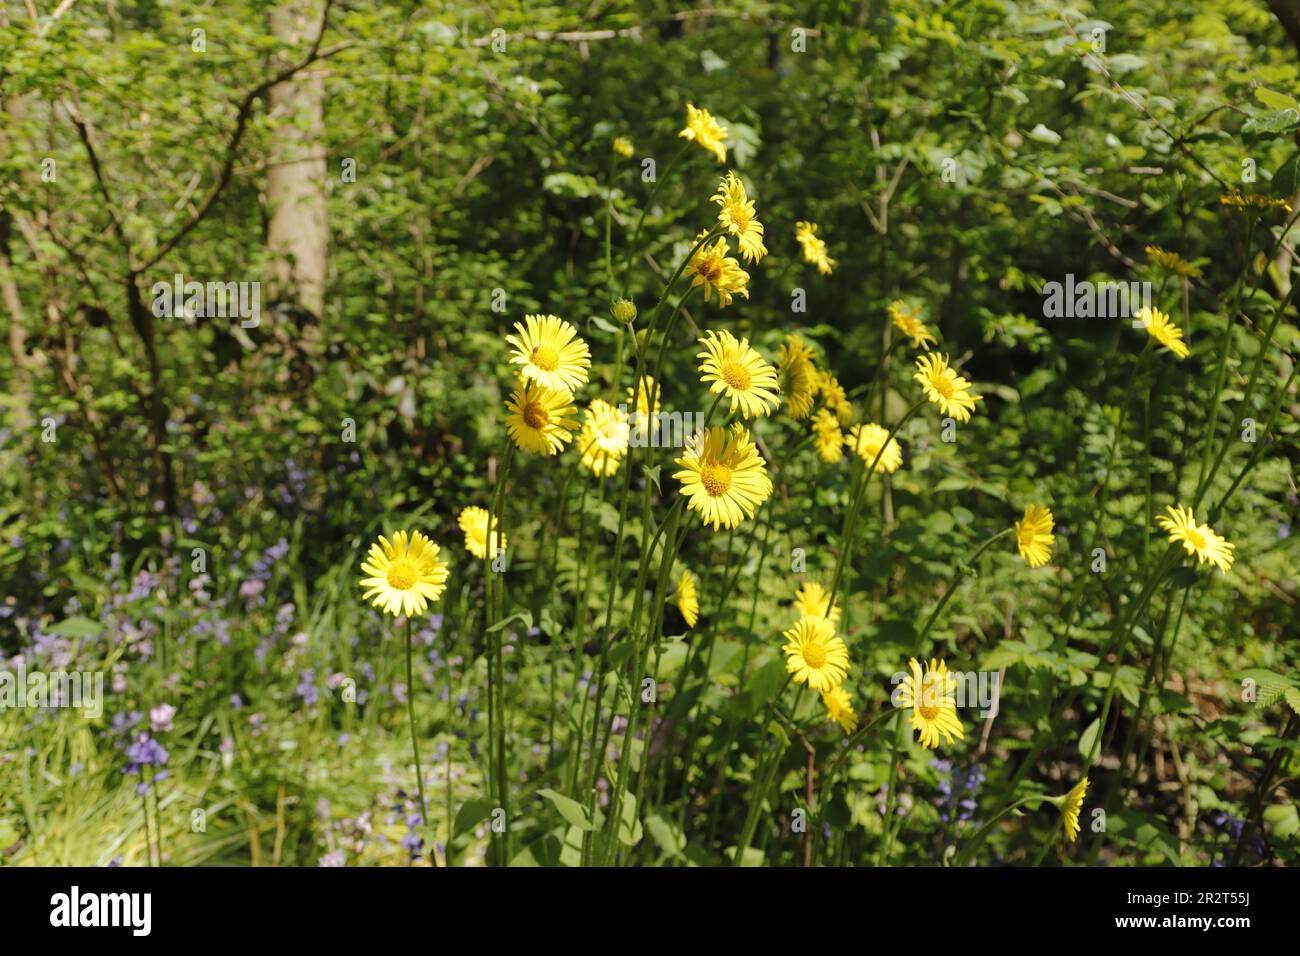 Doronicum orientale or Leopard's bane a beautiful spring sunflower shines in the sunlight Stock Photo